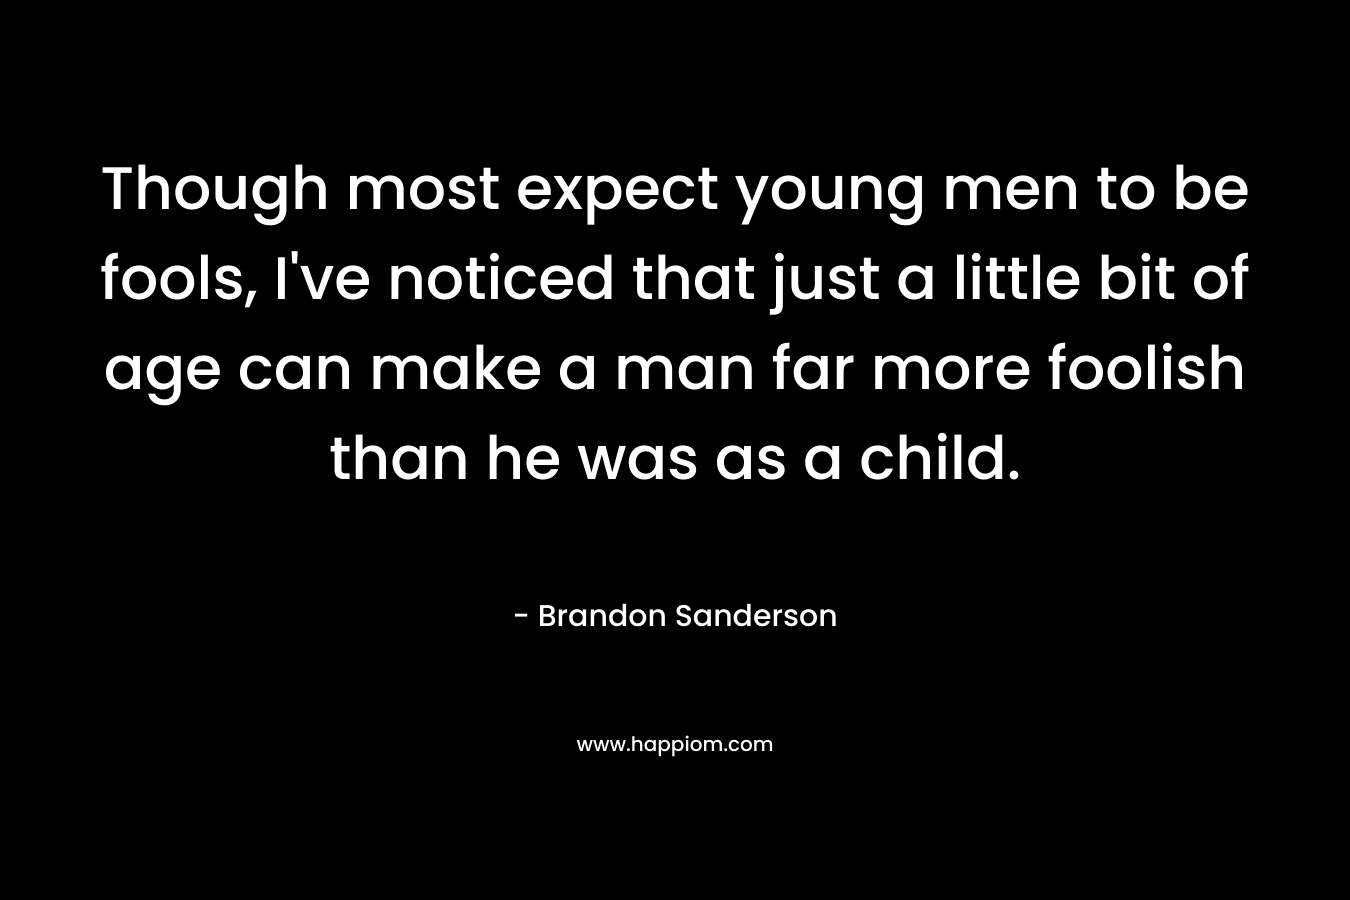 Though most expect young men to be fools, I’ve noticed that just a little bit of age can make a man far more foolish than he was as a child. – Brandon Sanderson